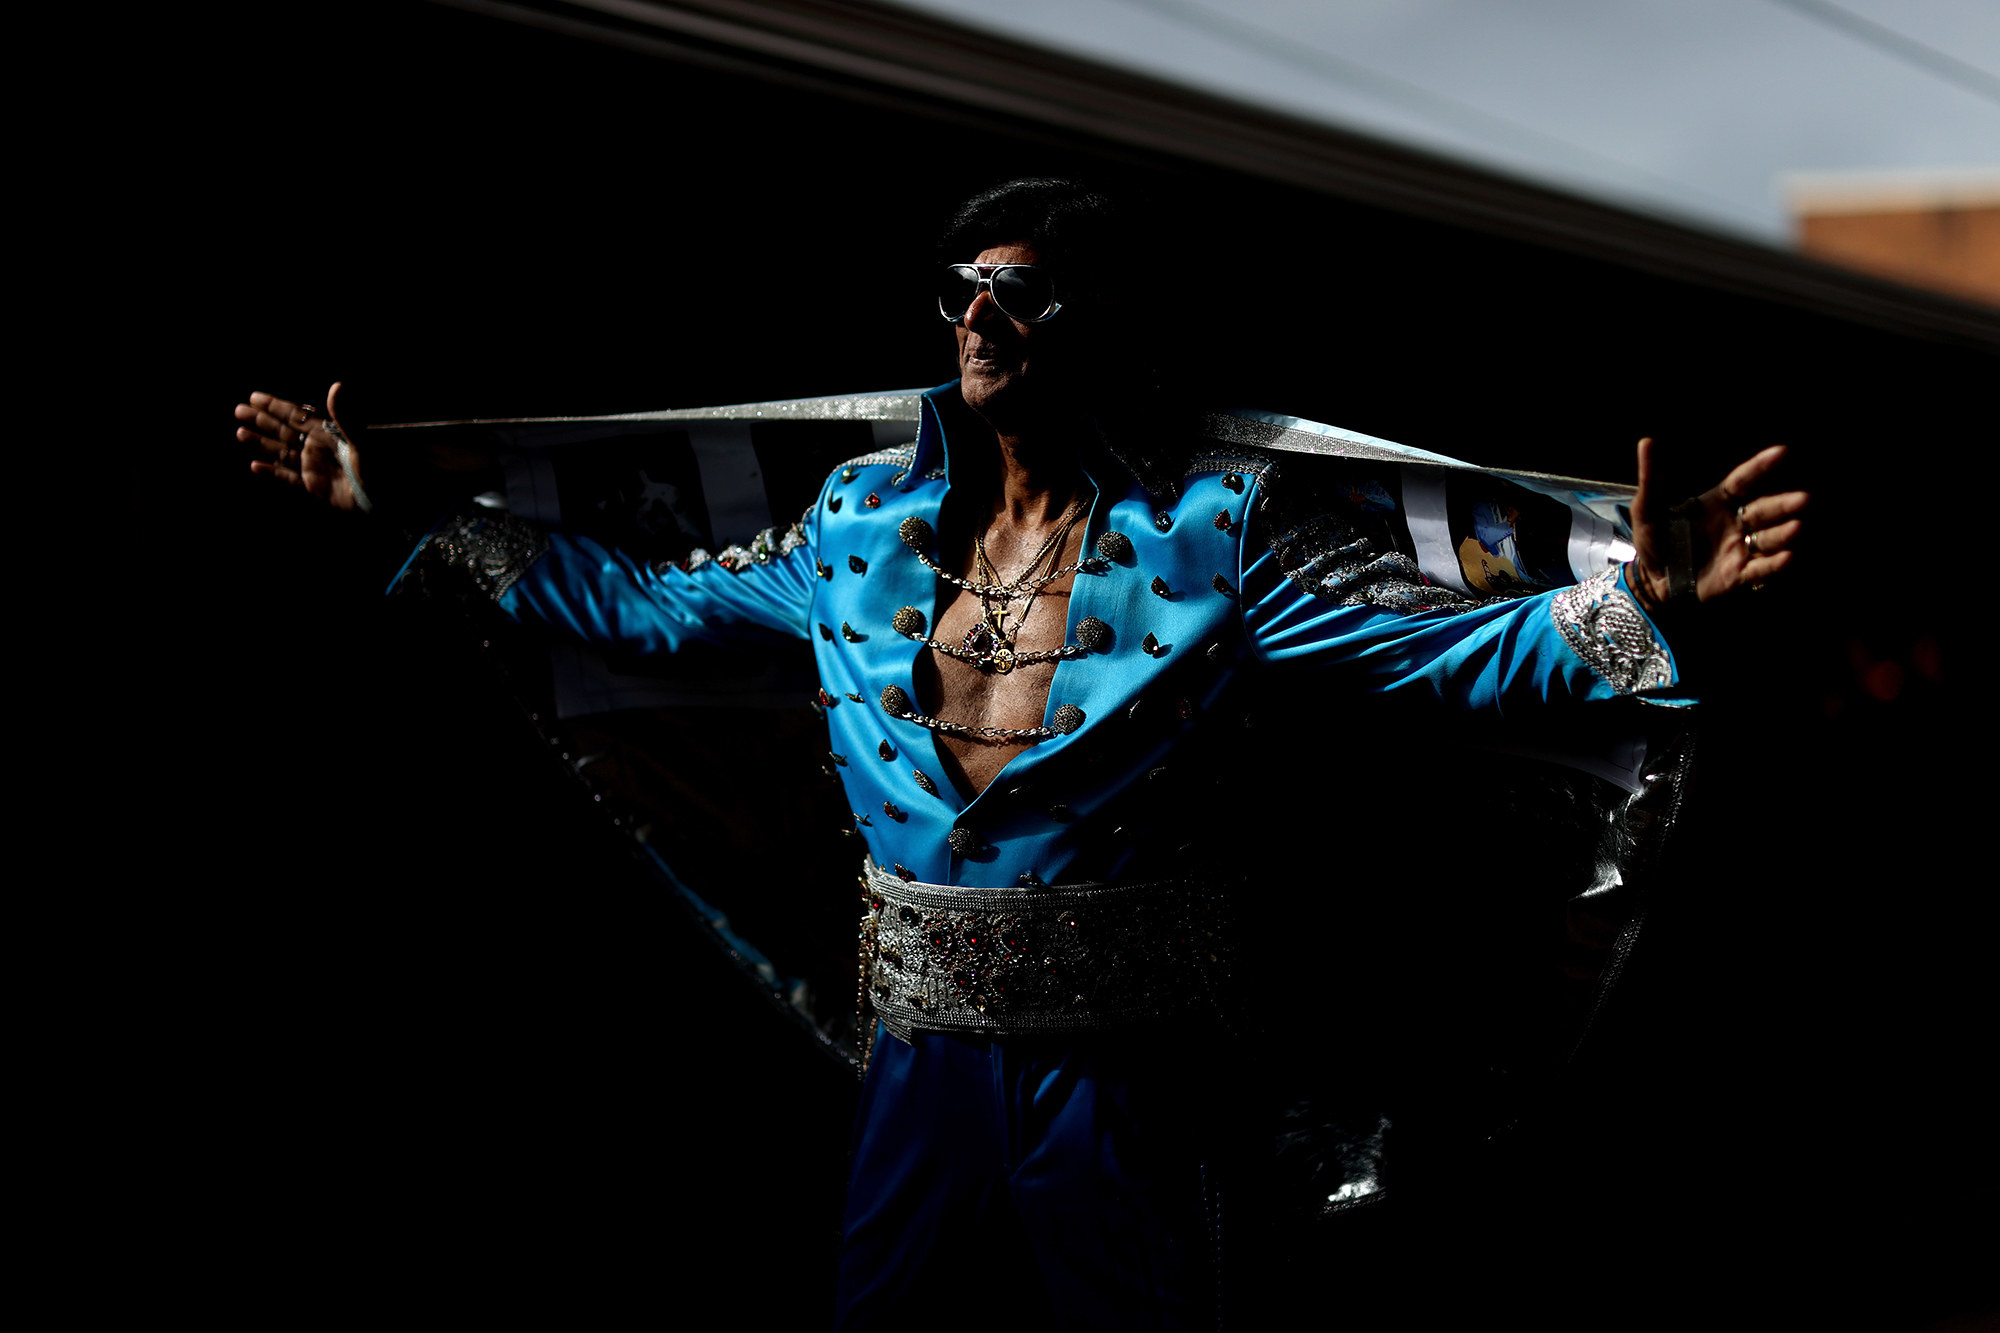 An Elvis impersonator in an open deep v stands in the shadows